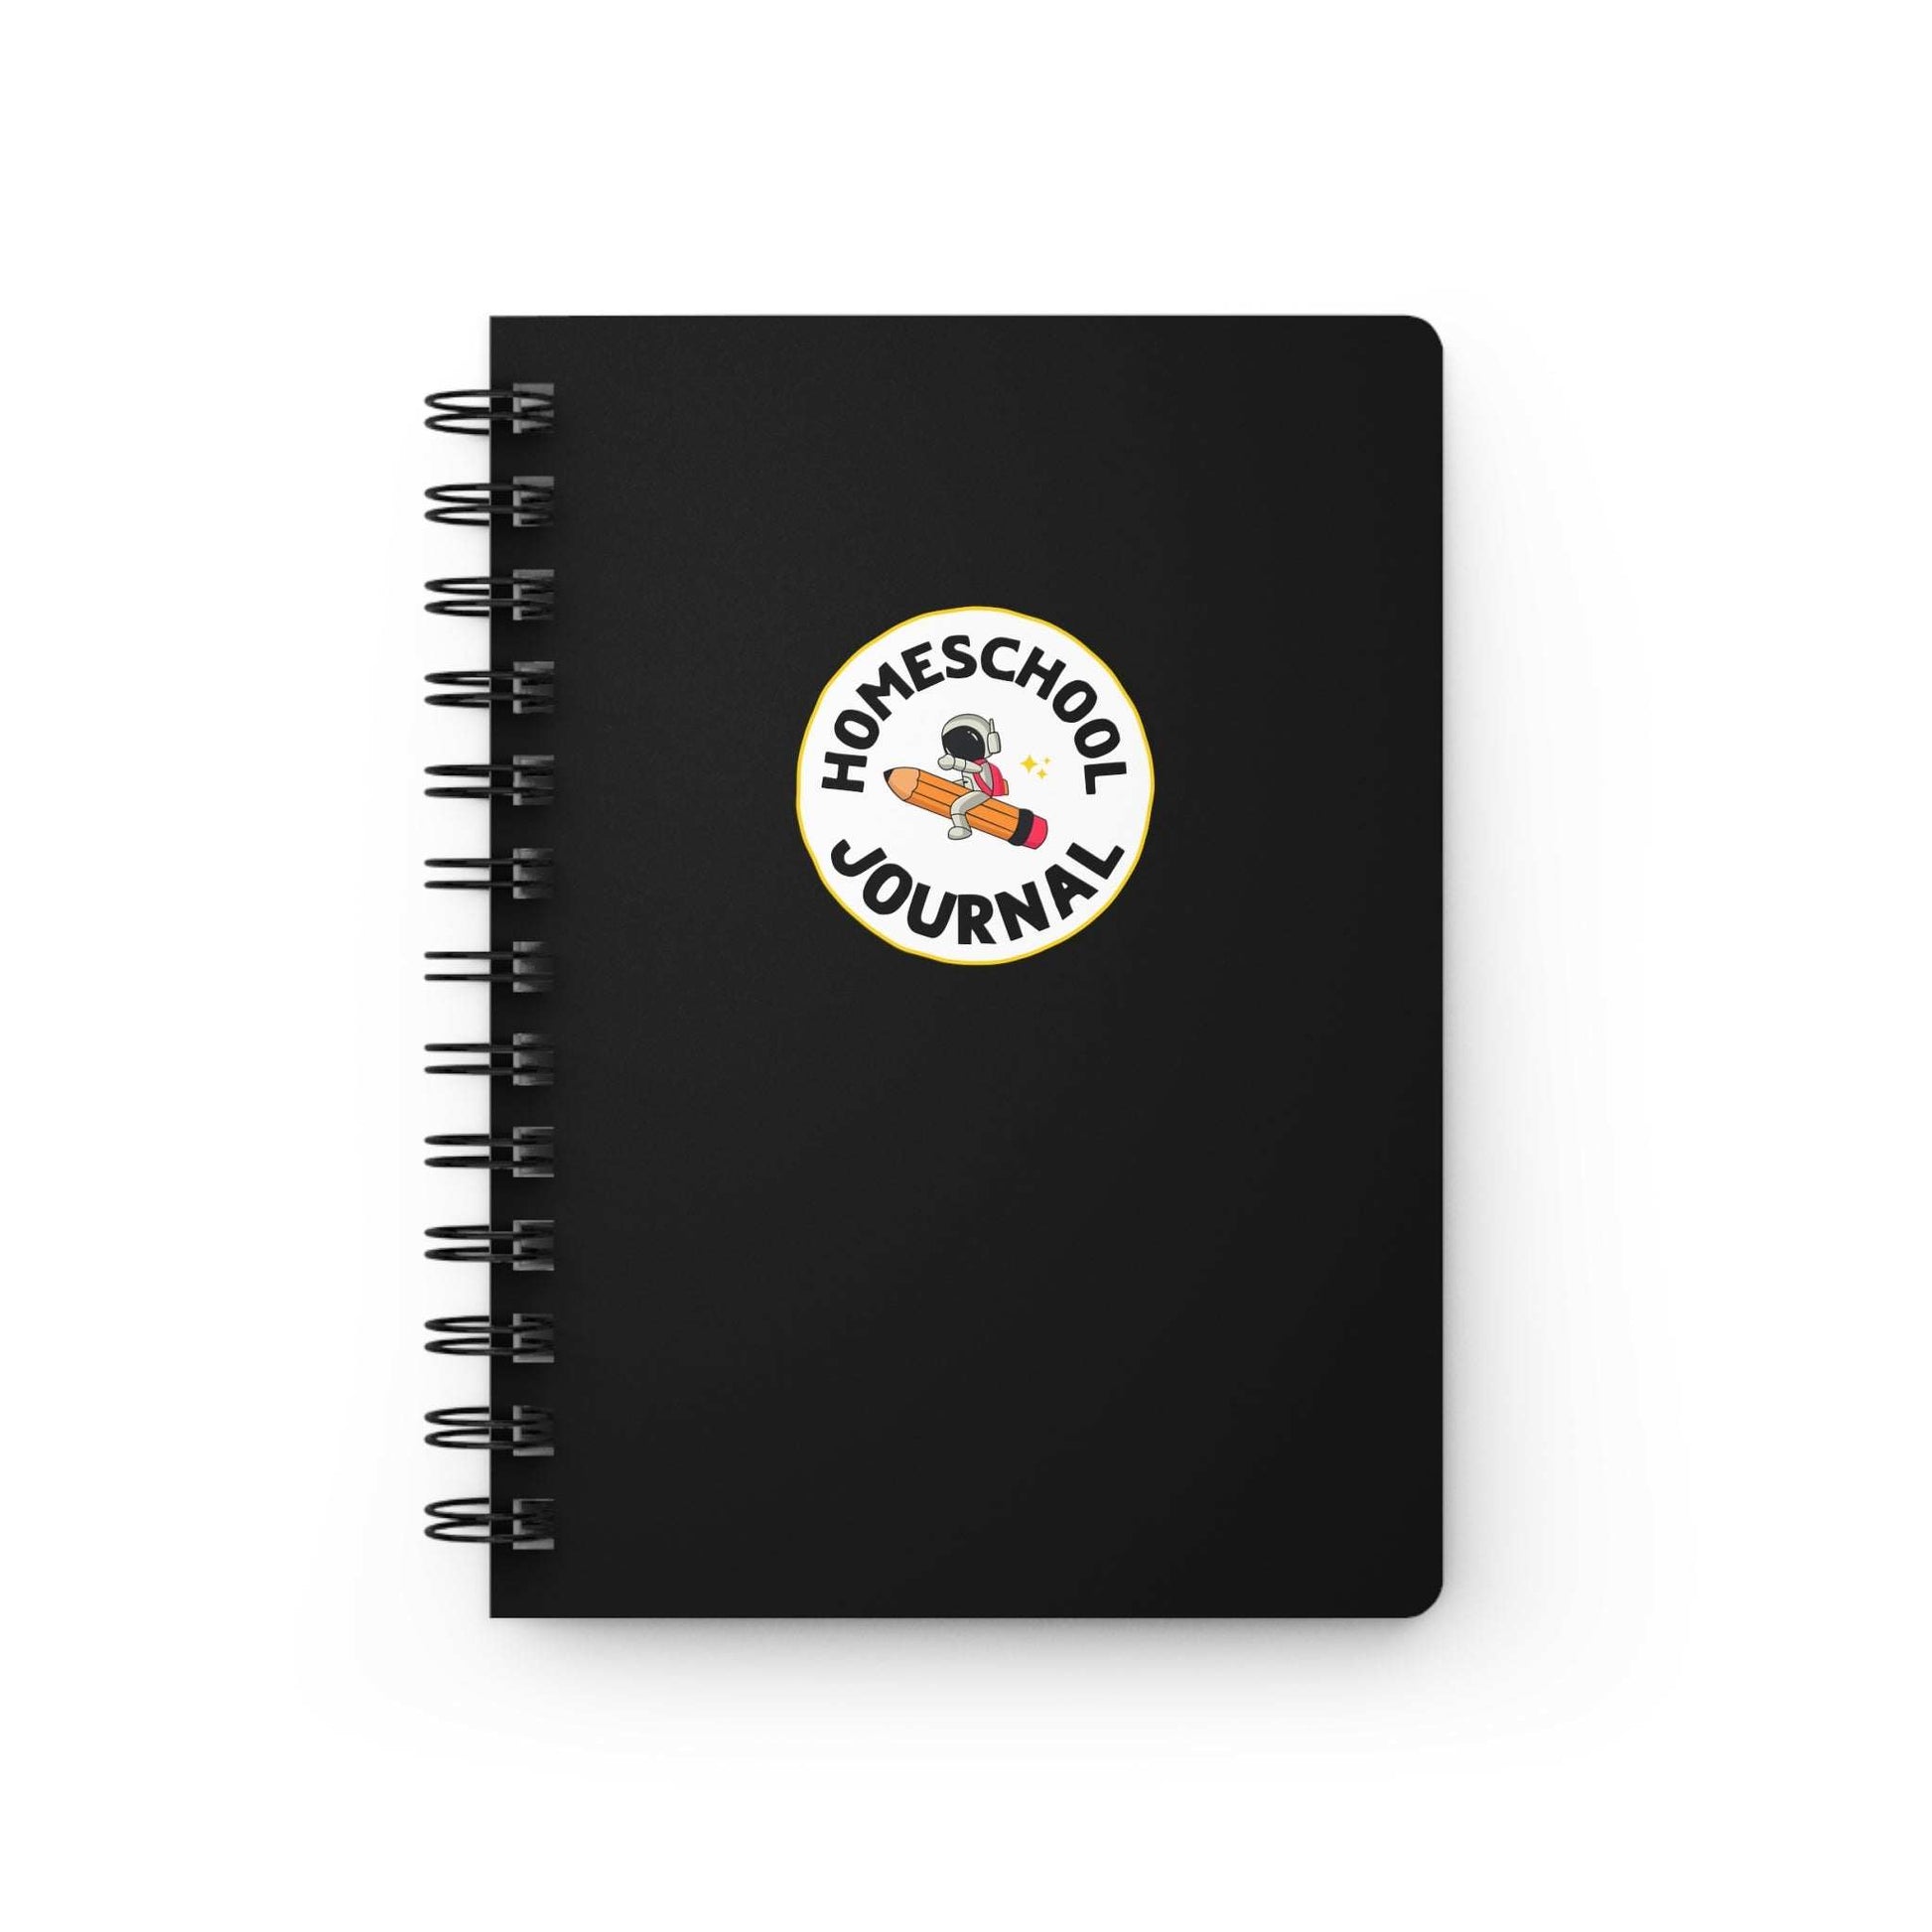 Astronaut Homeschool Spiral Bound JournalWolfe Paw DesignsAstronaut Homeschool Spiral Bound JournalBlack  - Astronaut Homeschool lined journal 
Your homeschooler can now write in style with our themed lined journals made for kids just like yours!
Each color has itAstronaut Homeschool Spiral Bound Journal